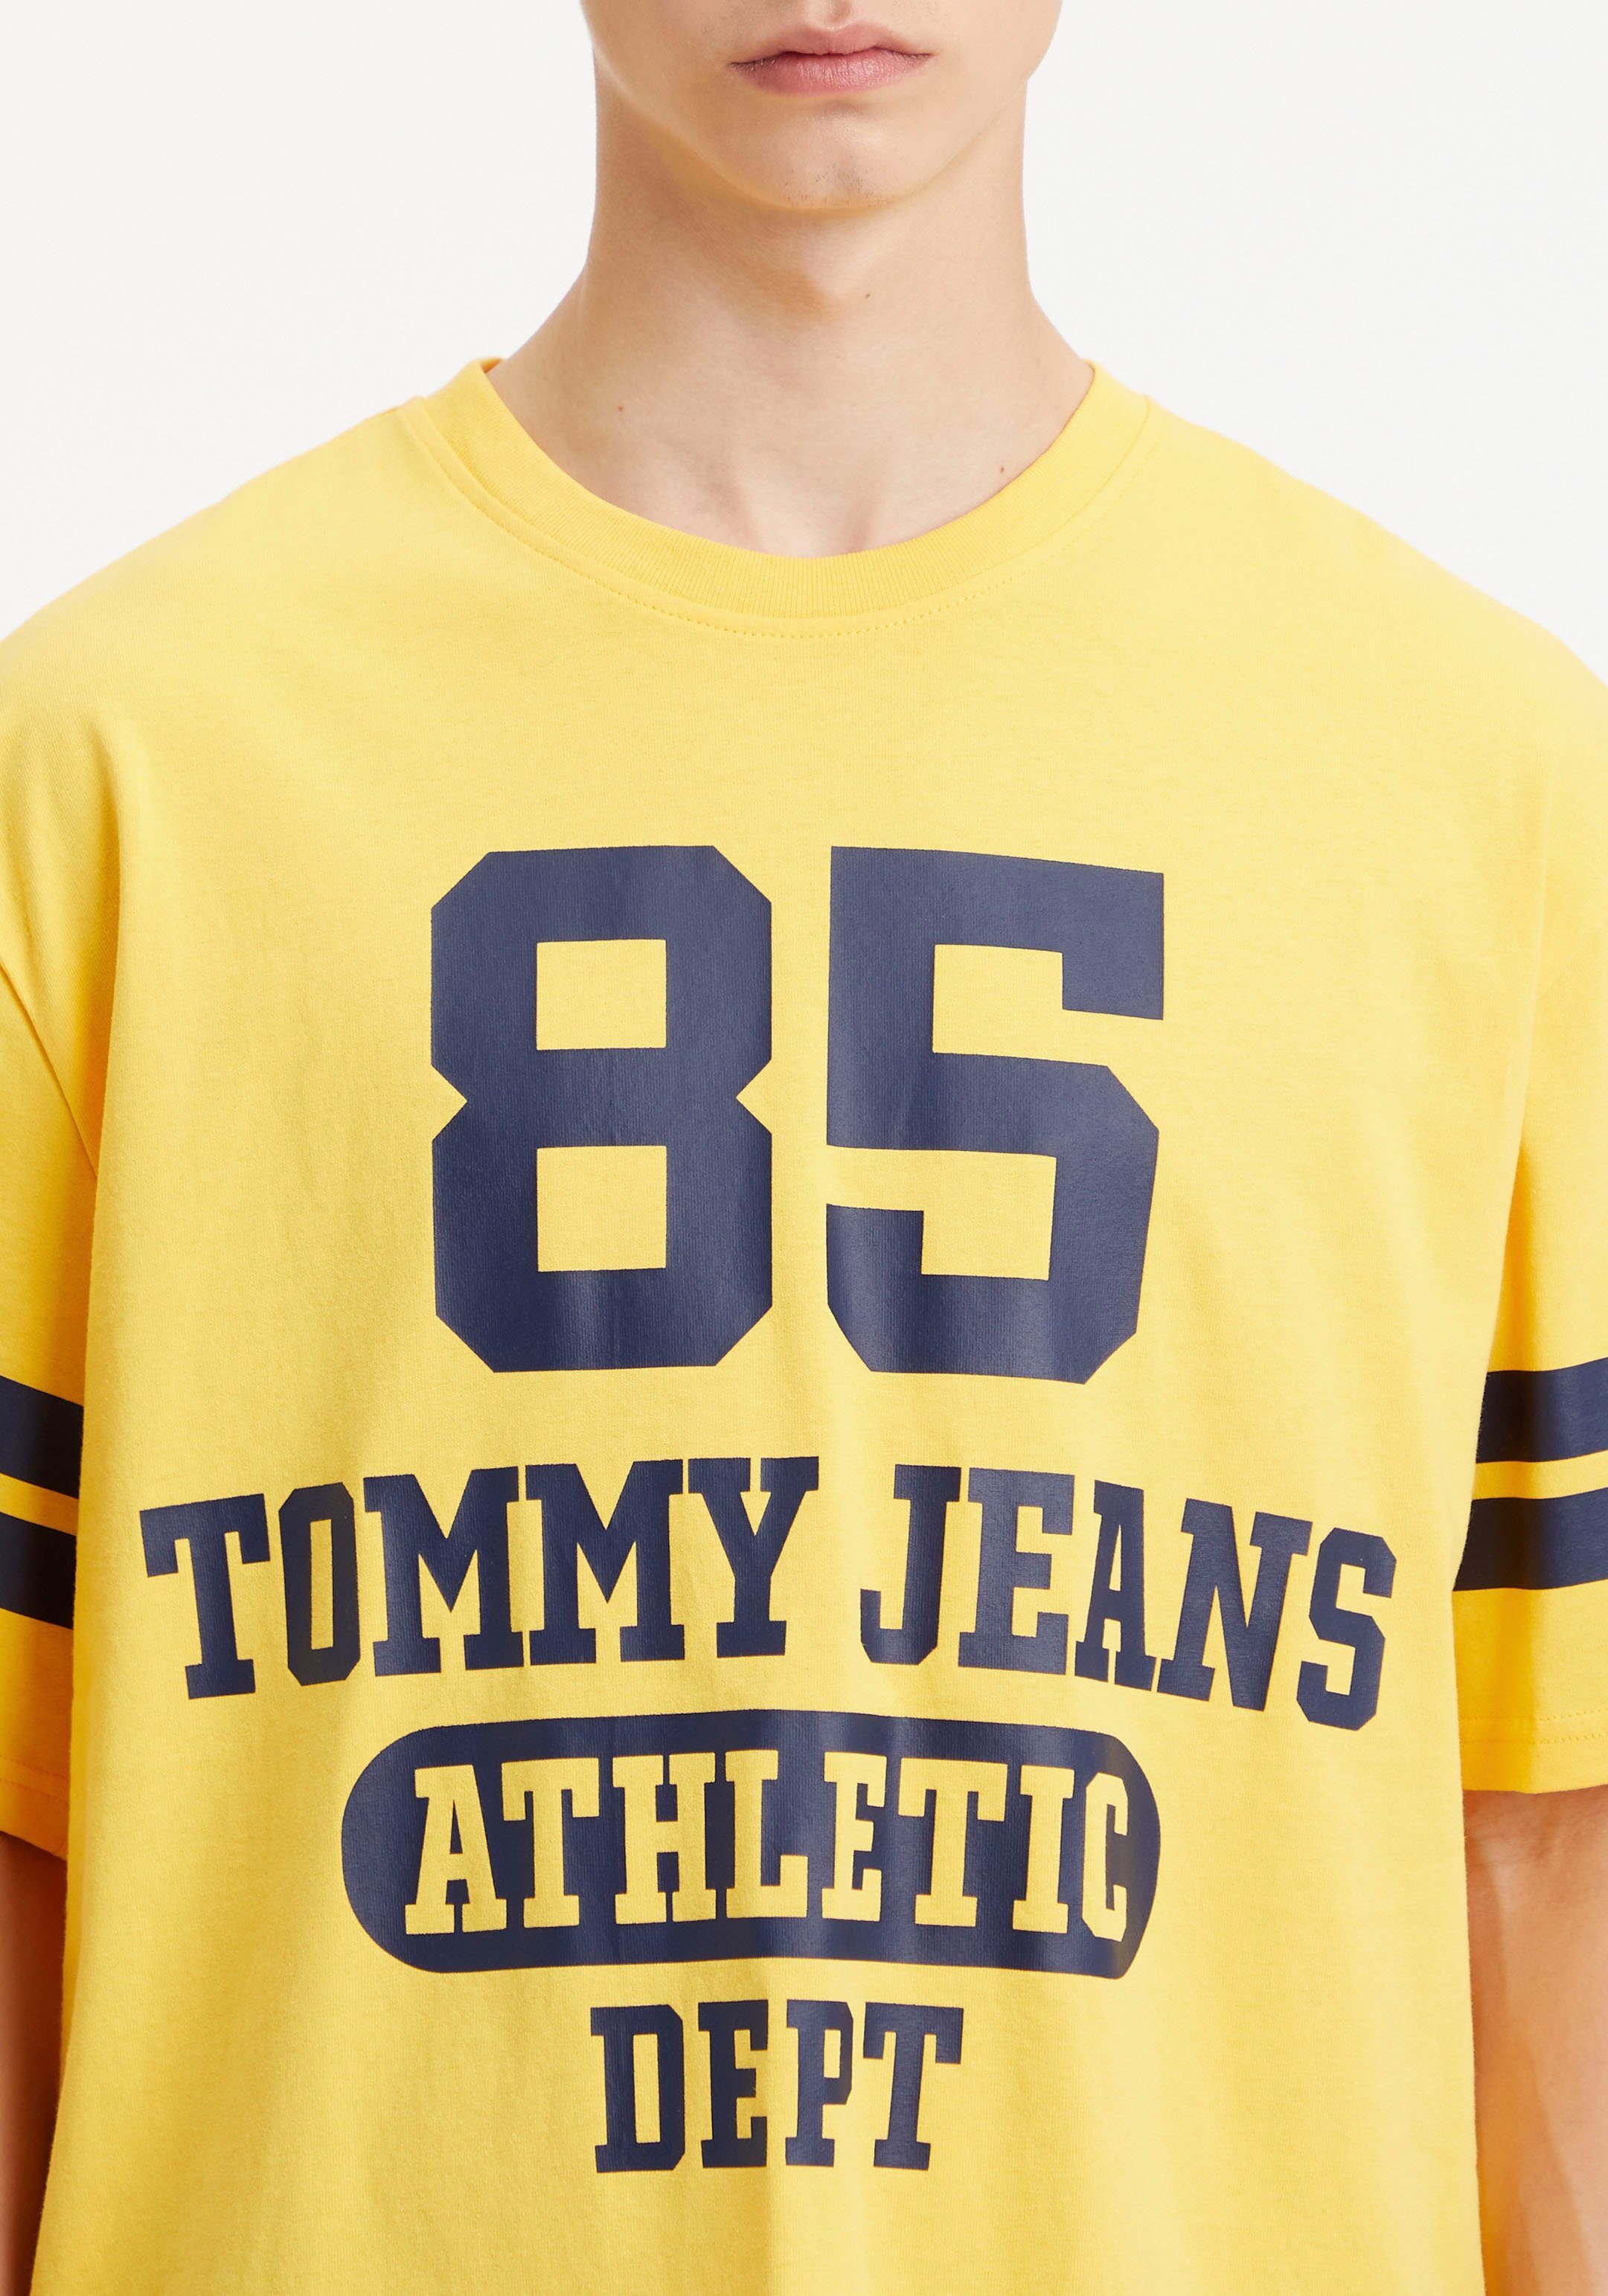 Tommy Jeans T-Shirt TJM SKATER Yellow Warm LOGO 85 COLLEGE